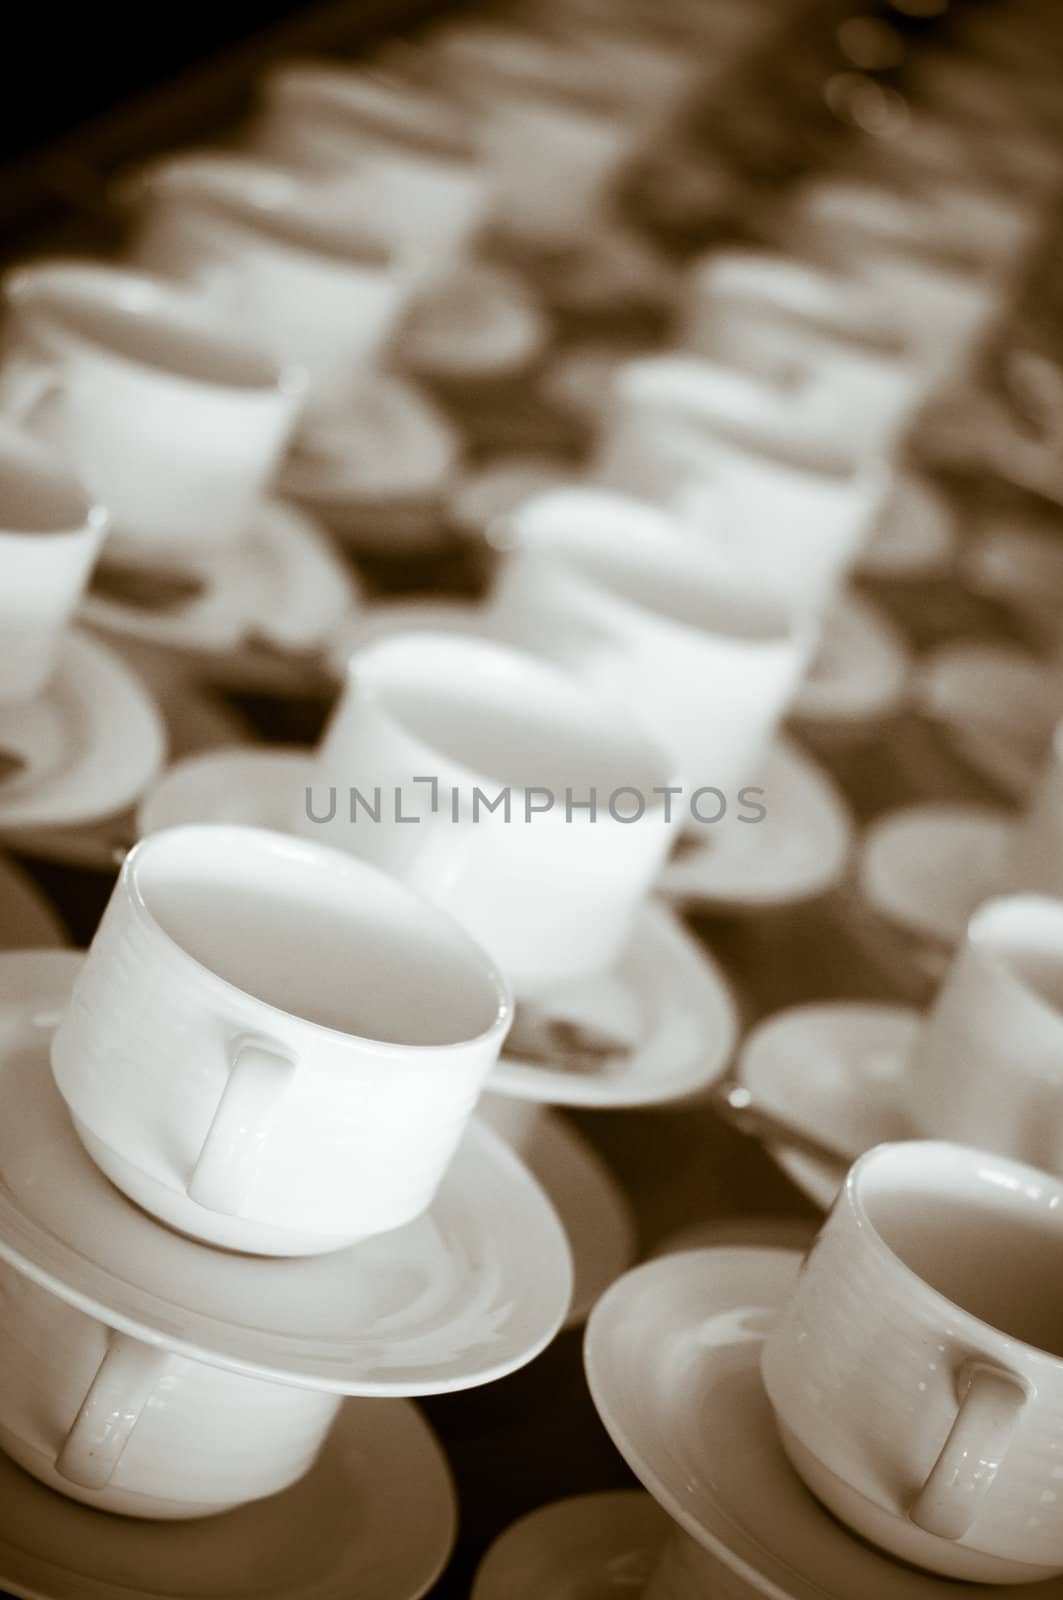 Many rows of white cups and saucers in retro style by iryna_rasko